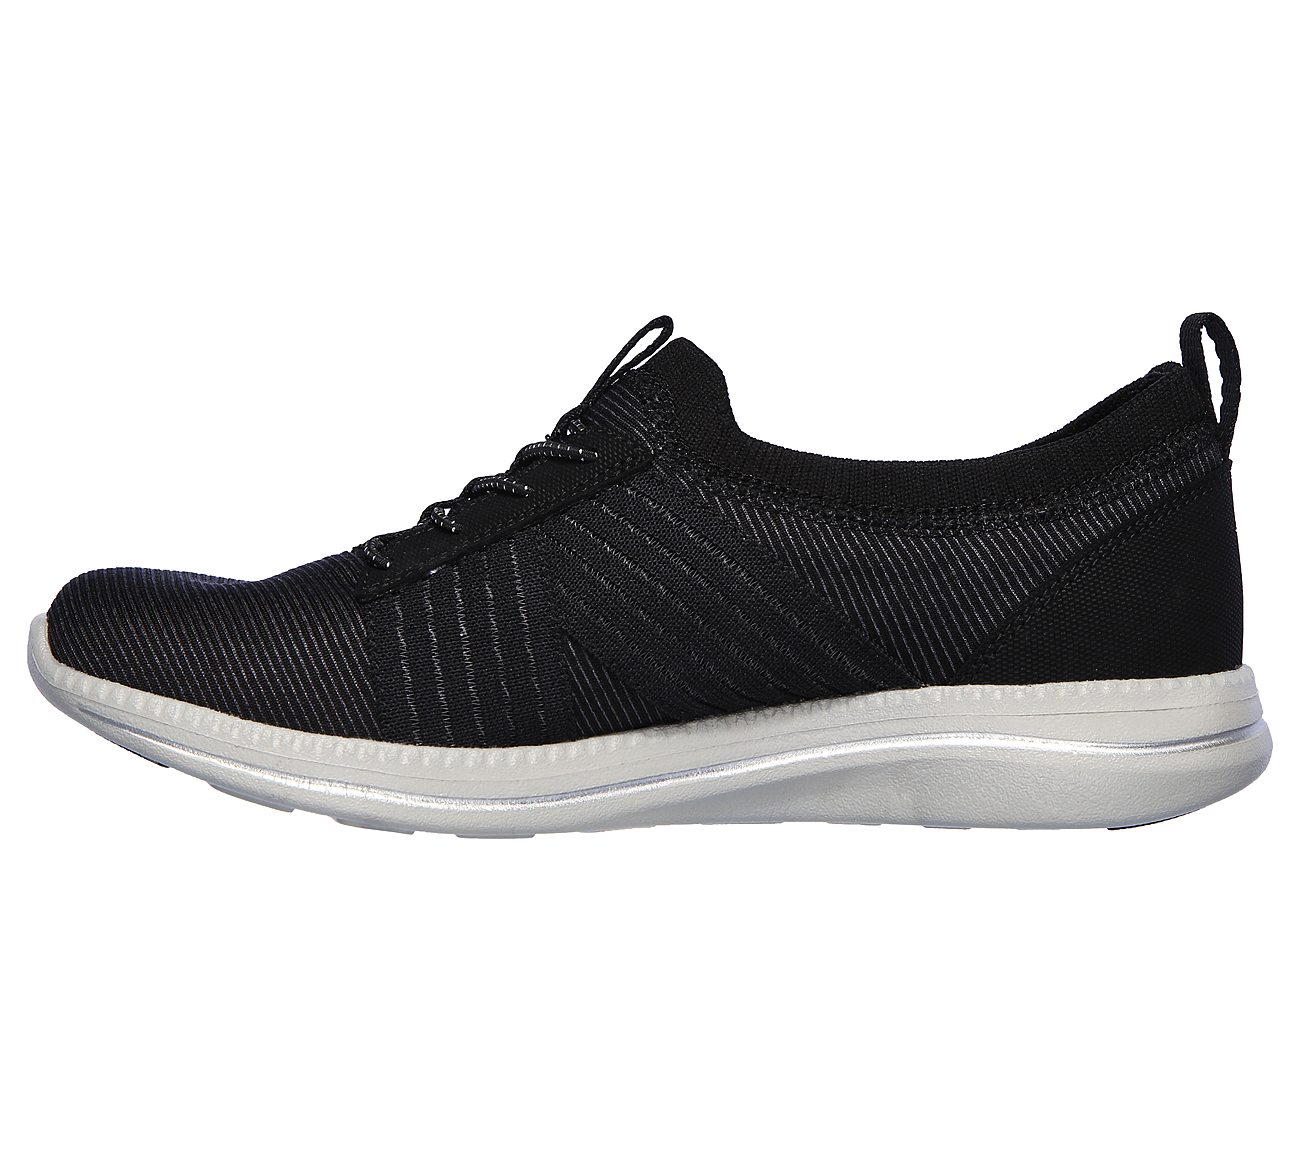 CITY PRO - EASY MOVING, BBBBLACK Footwear Left View